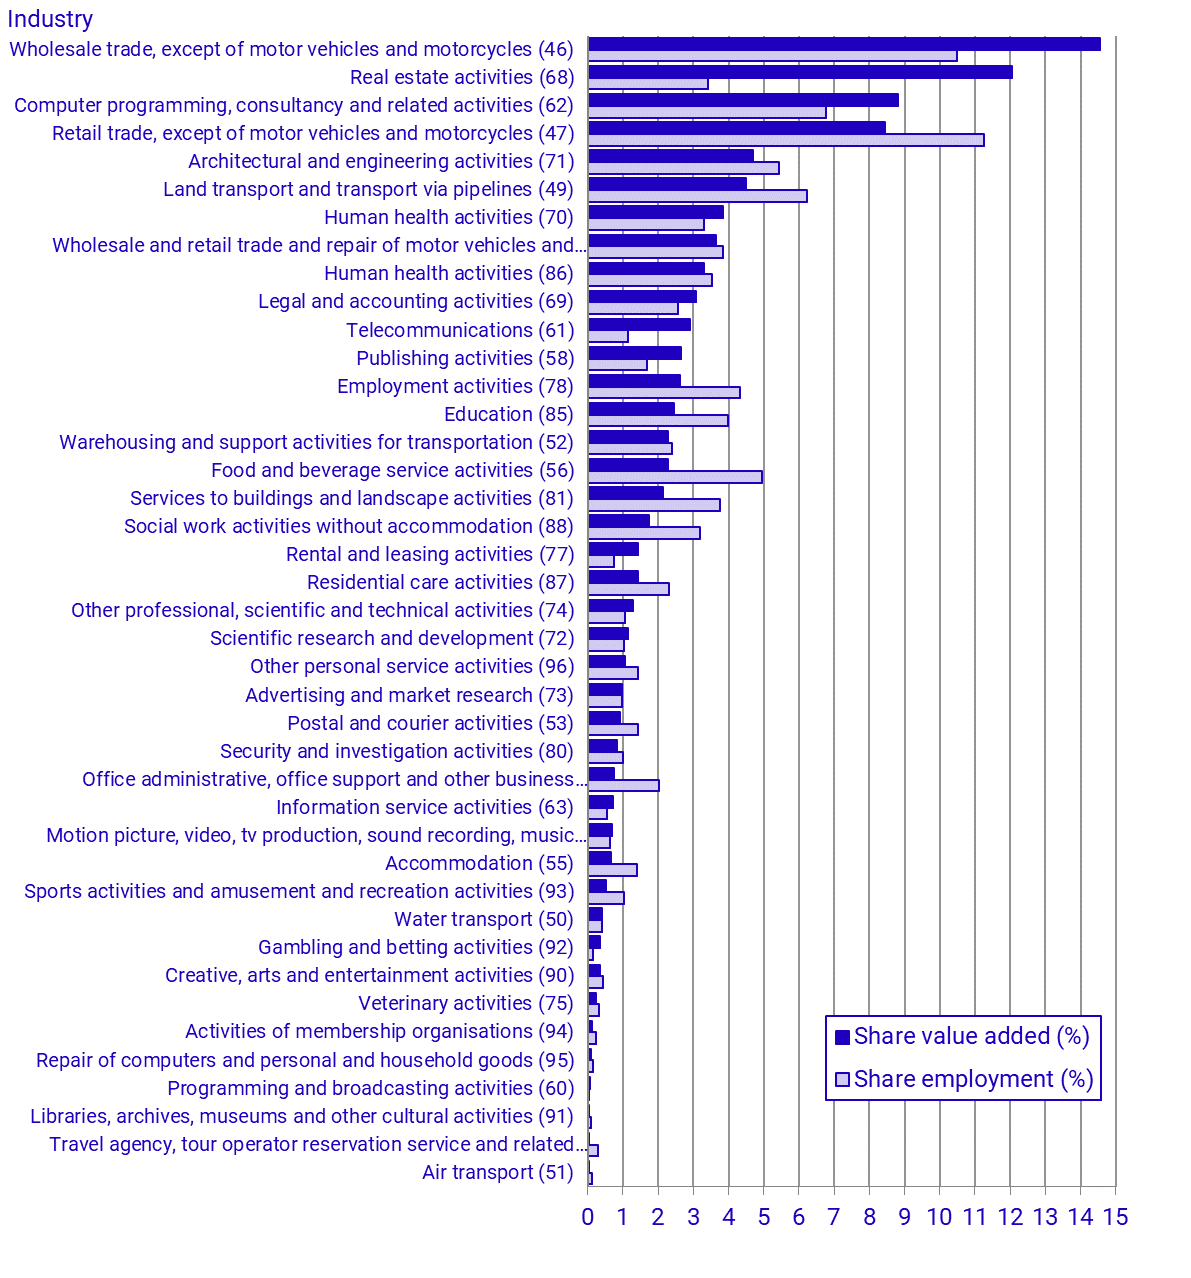 Share of total service sector value added and employment by industry (NACE sections) 2020